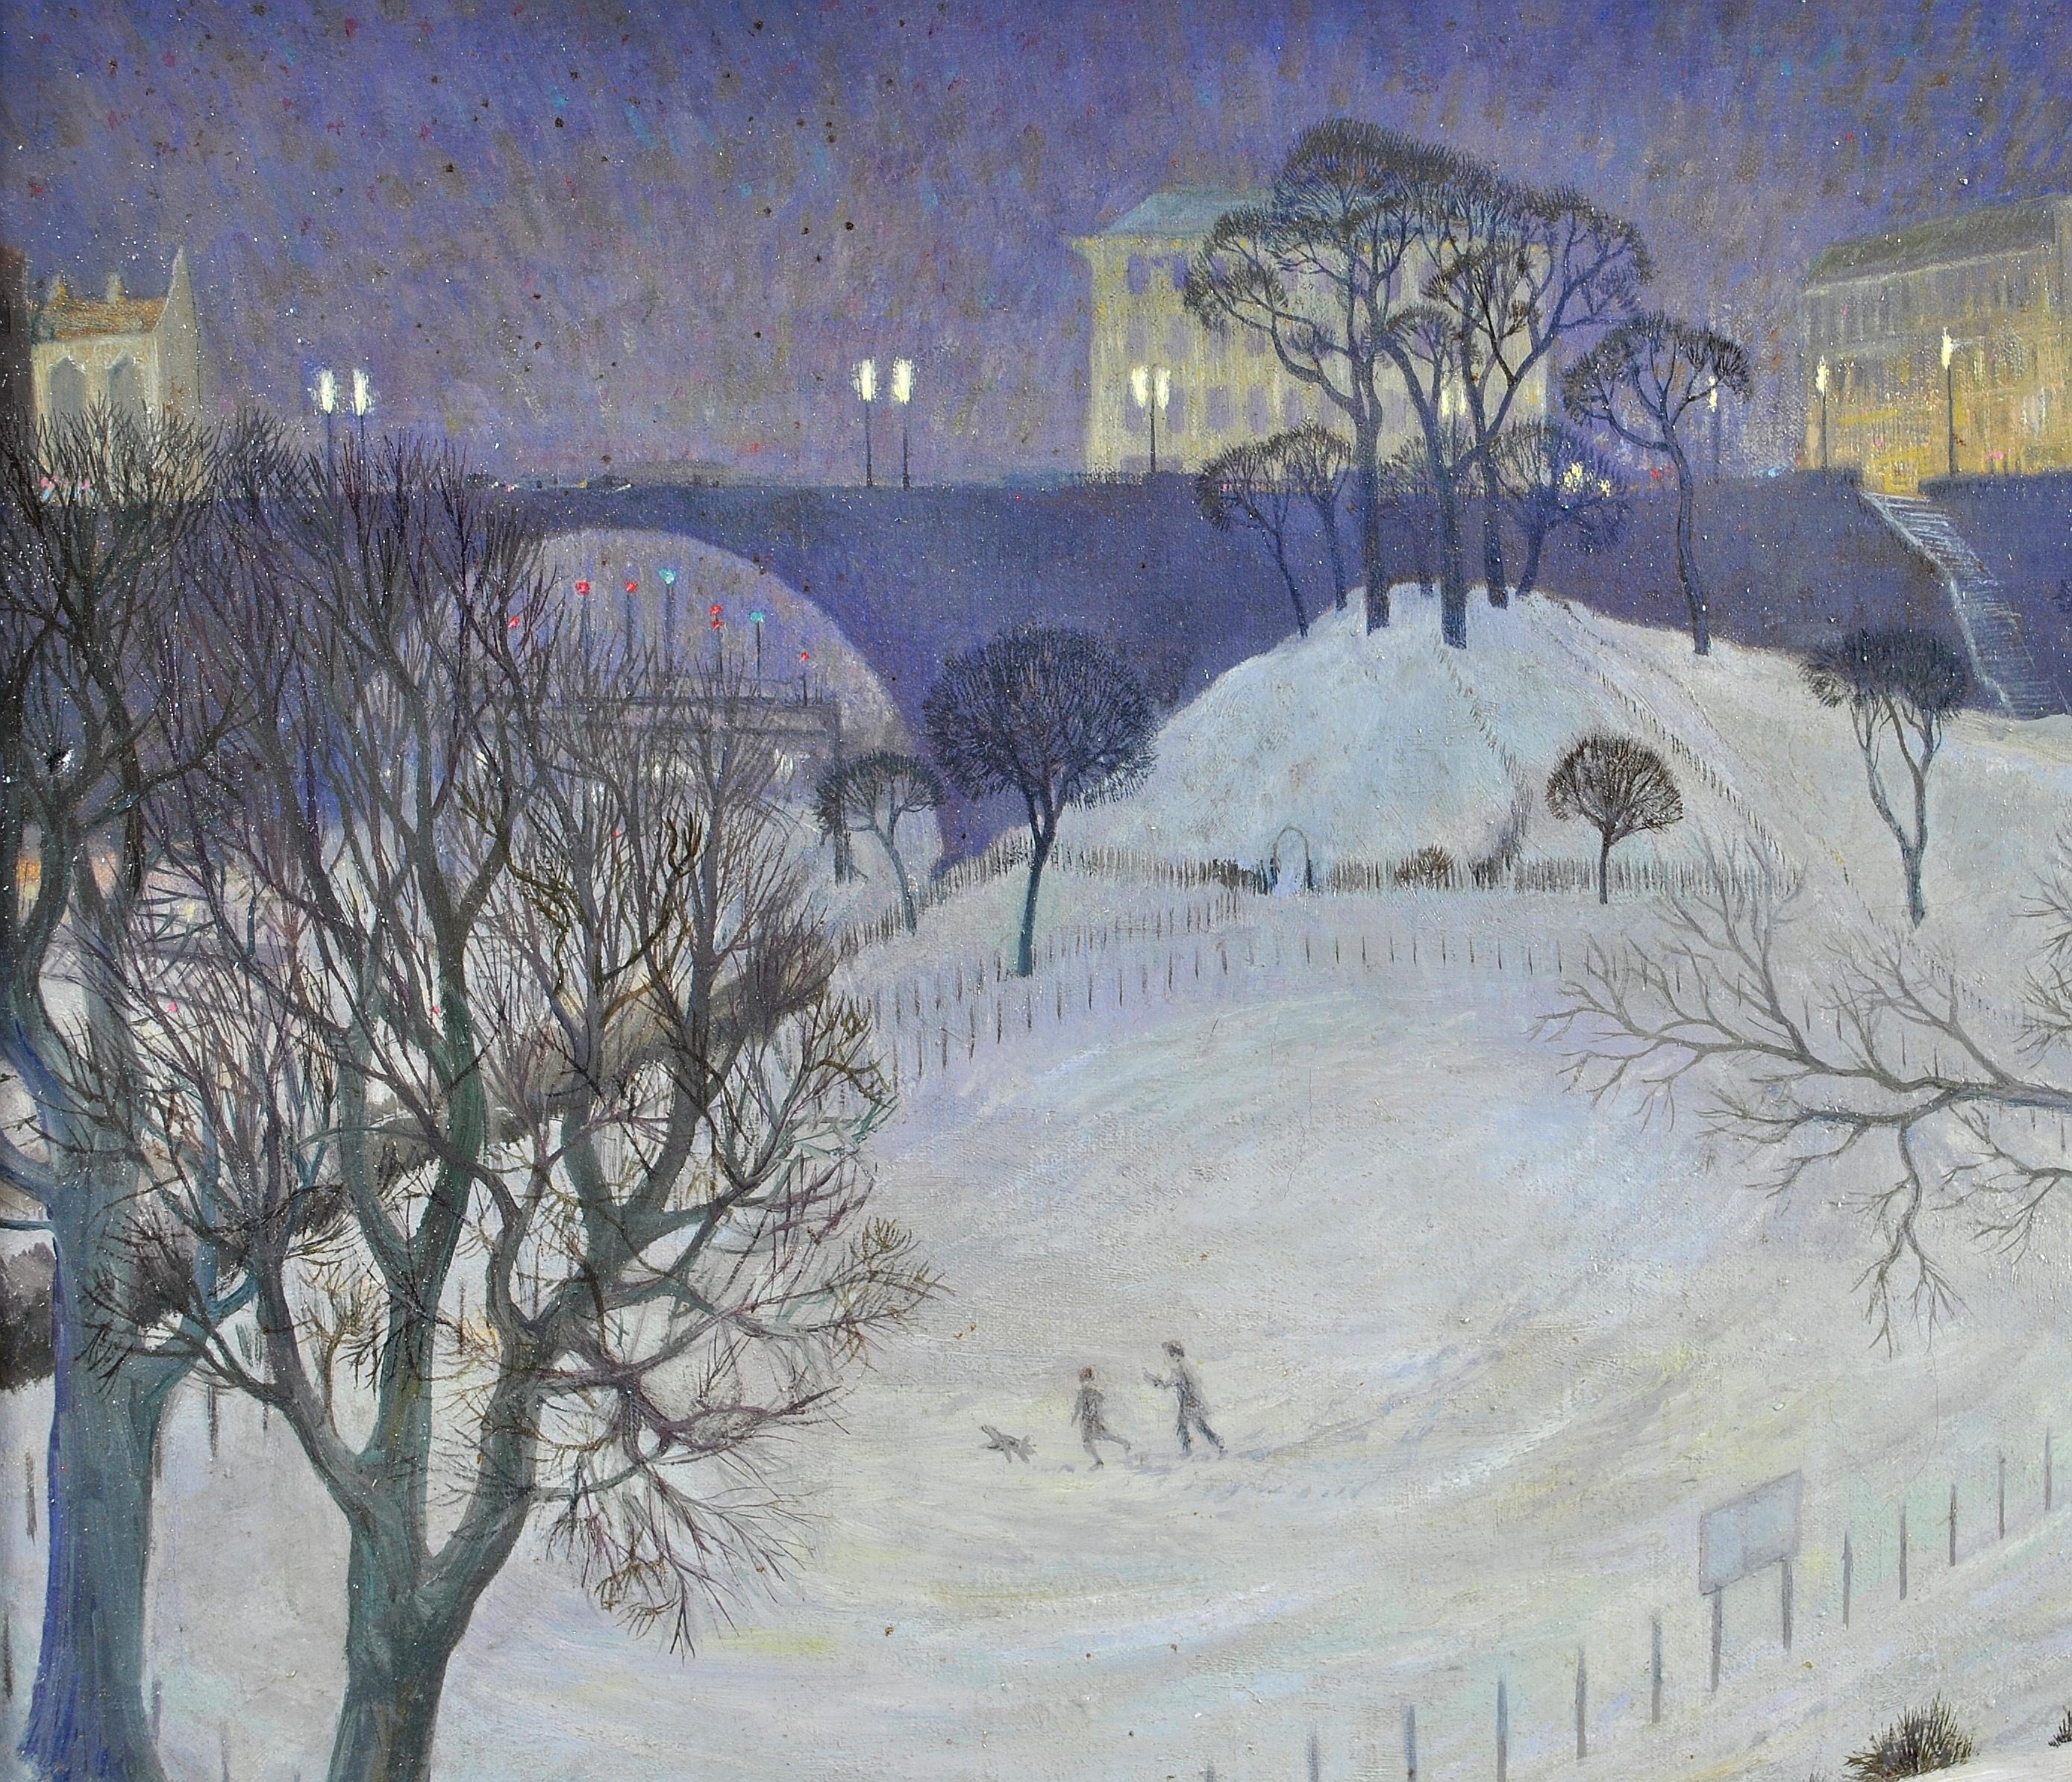 A wonderful 1960's oil on canvas by Scottish artist Kenneth Roberts depicting a snow covered winter landscape with figures walking and a dog.

The work is inscribed ''Winter Gardens '' on the reverse and is believed to depict Union Terrace Gardens